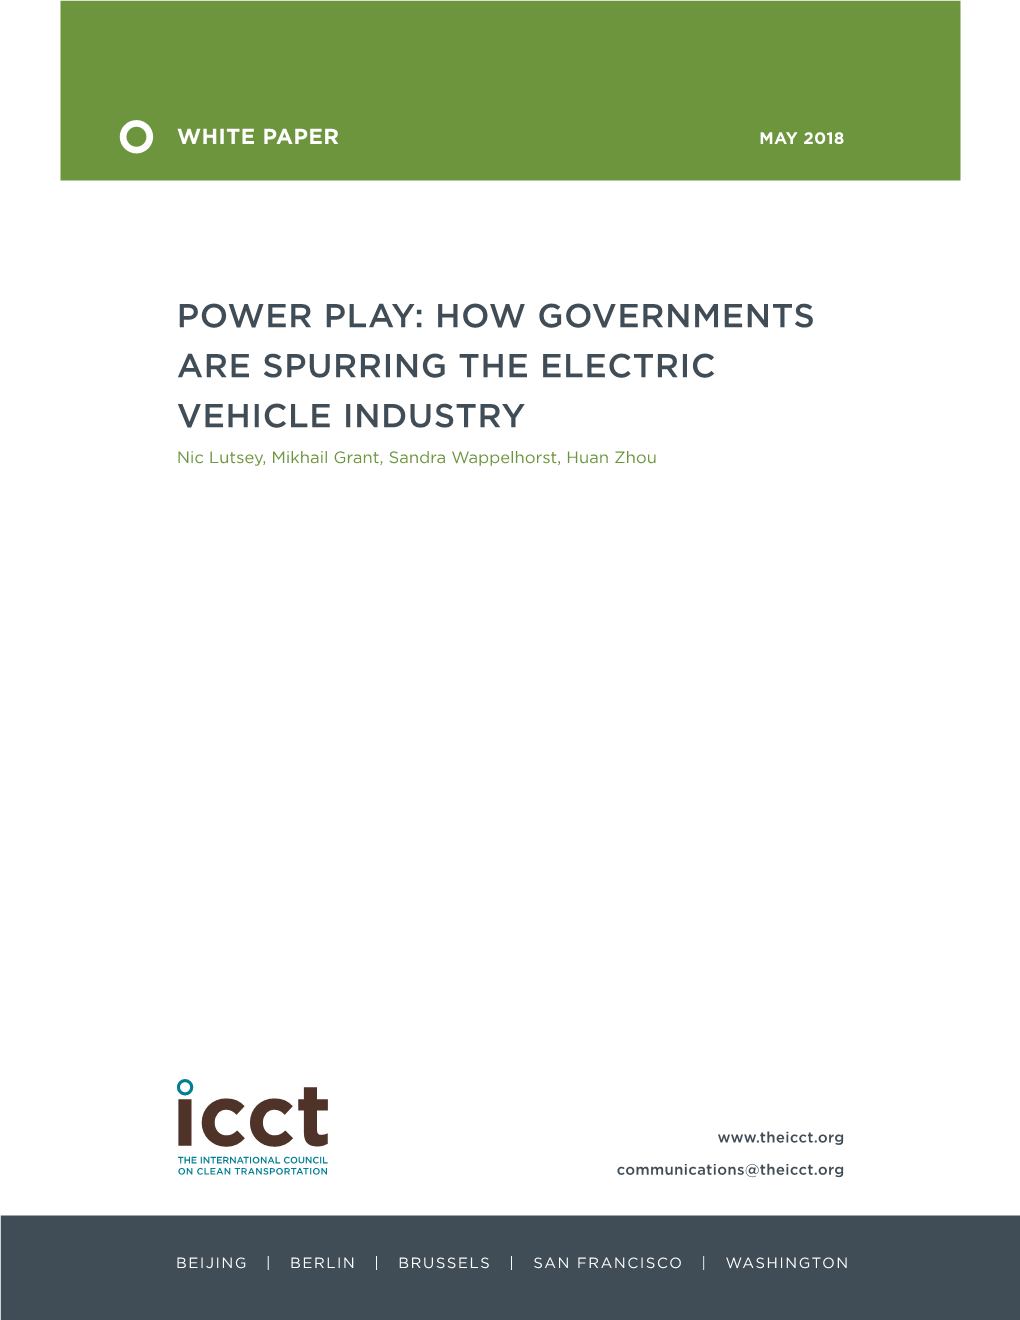 POWER PLAY: HOW GOVERNMENTS ARE SPURRING the ELECTRIC VEHICLE INDUSTRY Nic Lutsey, Mikhail Grant, Sandra Wappelhorst, Huan Zhou